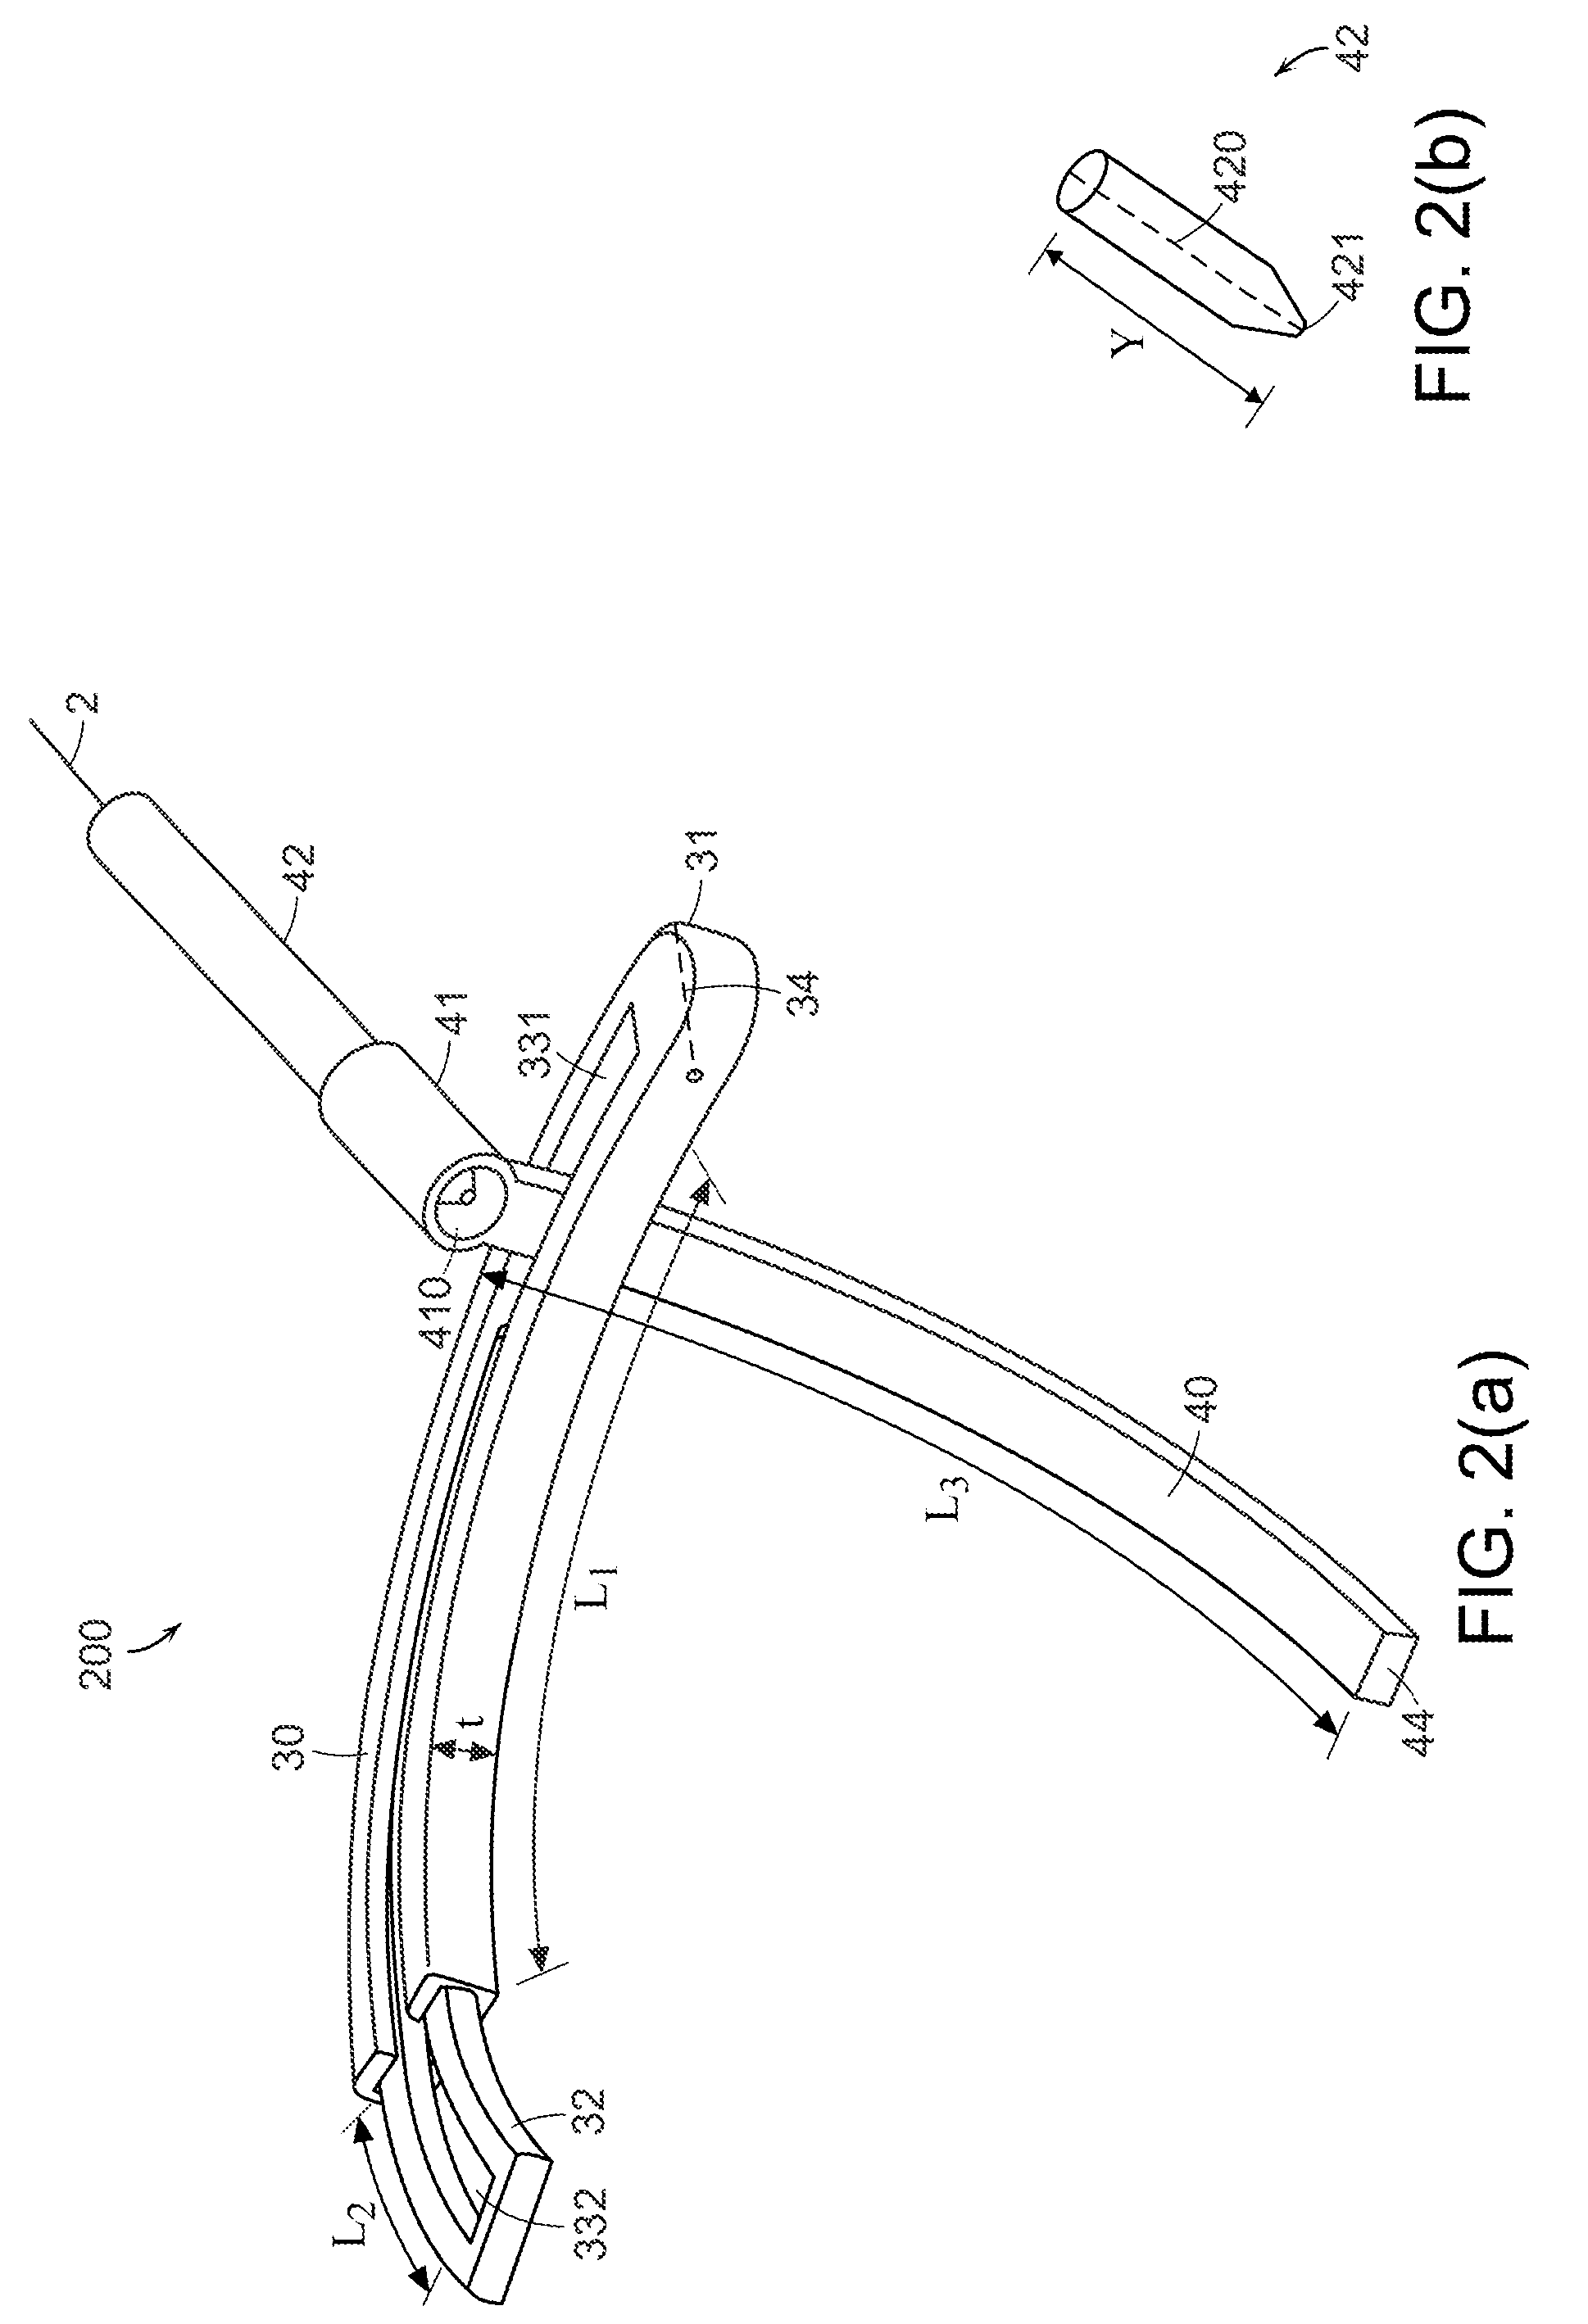 Apparatus and Method for Aiming a Surgical Tool